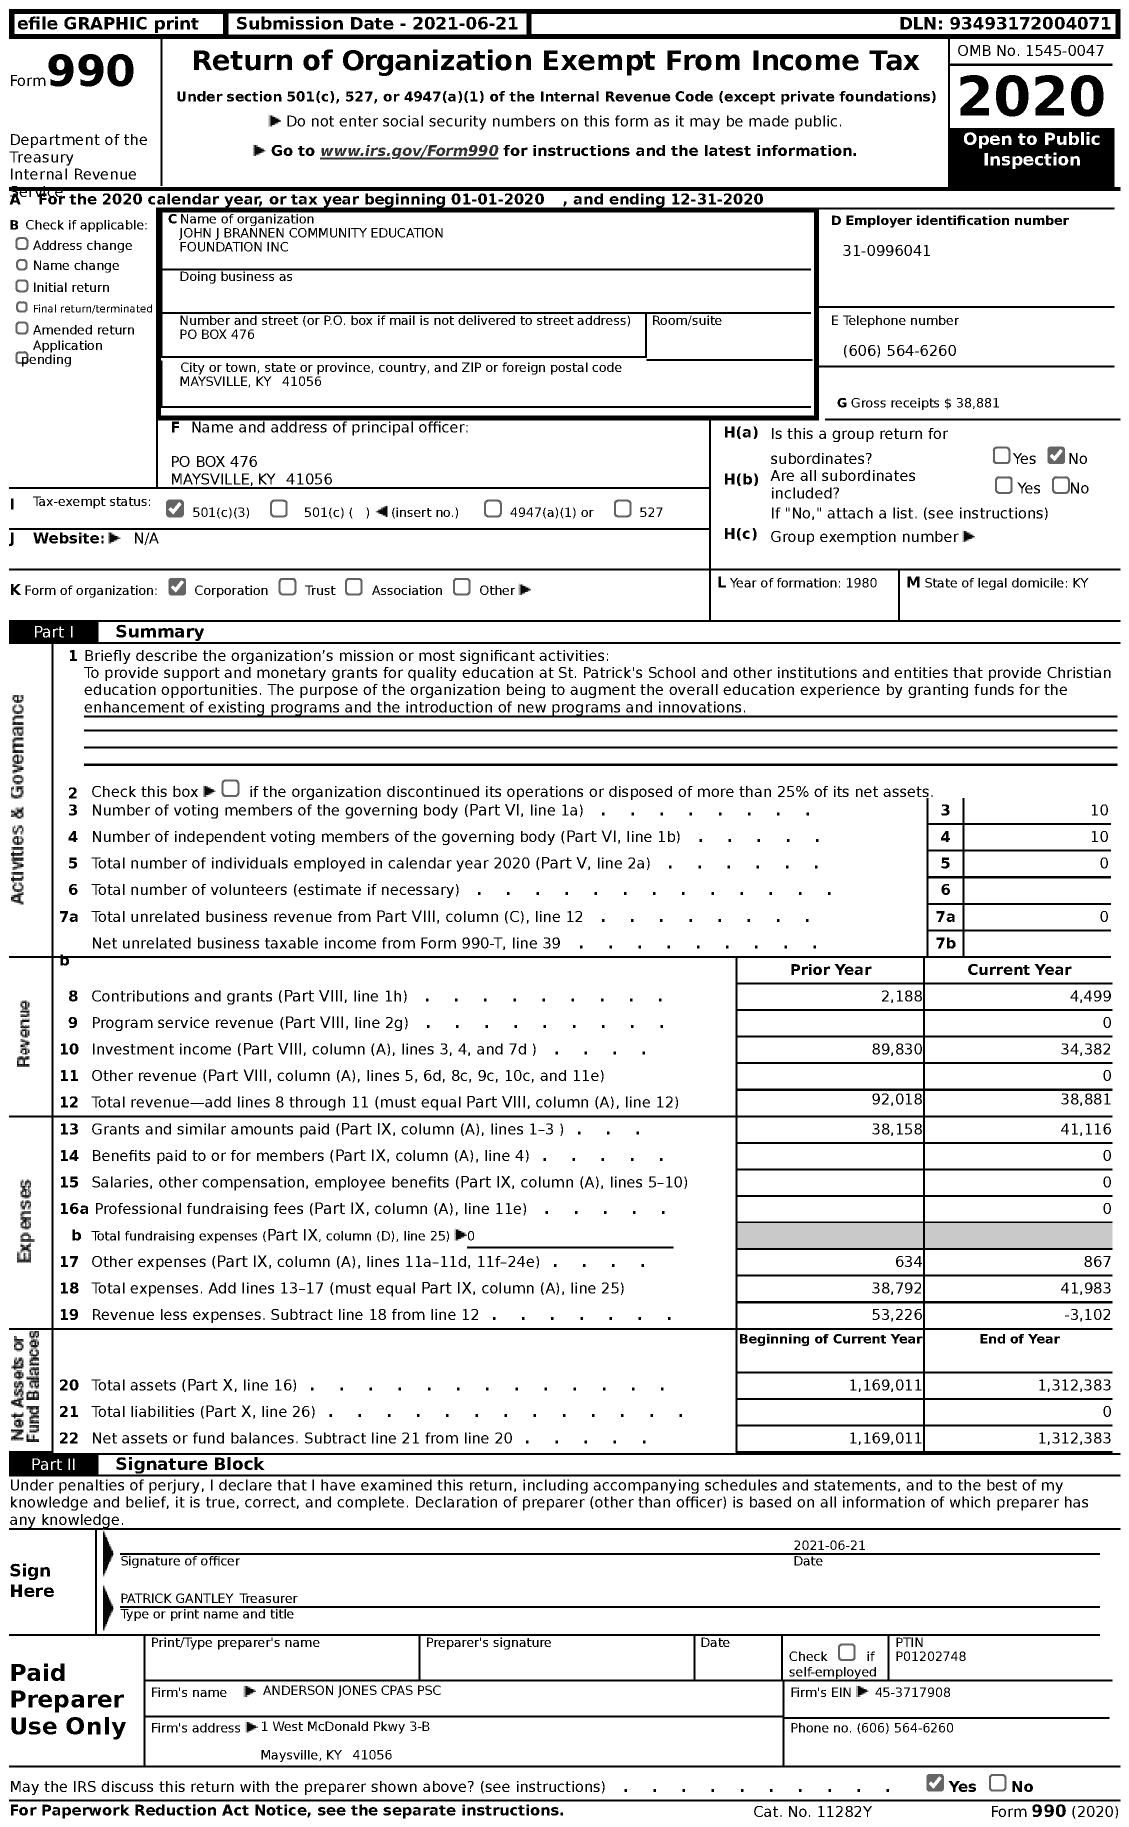 Image of first page of 2020 Form 990 for John J Brannen Community Education Foundation